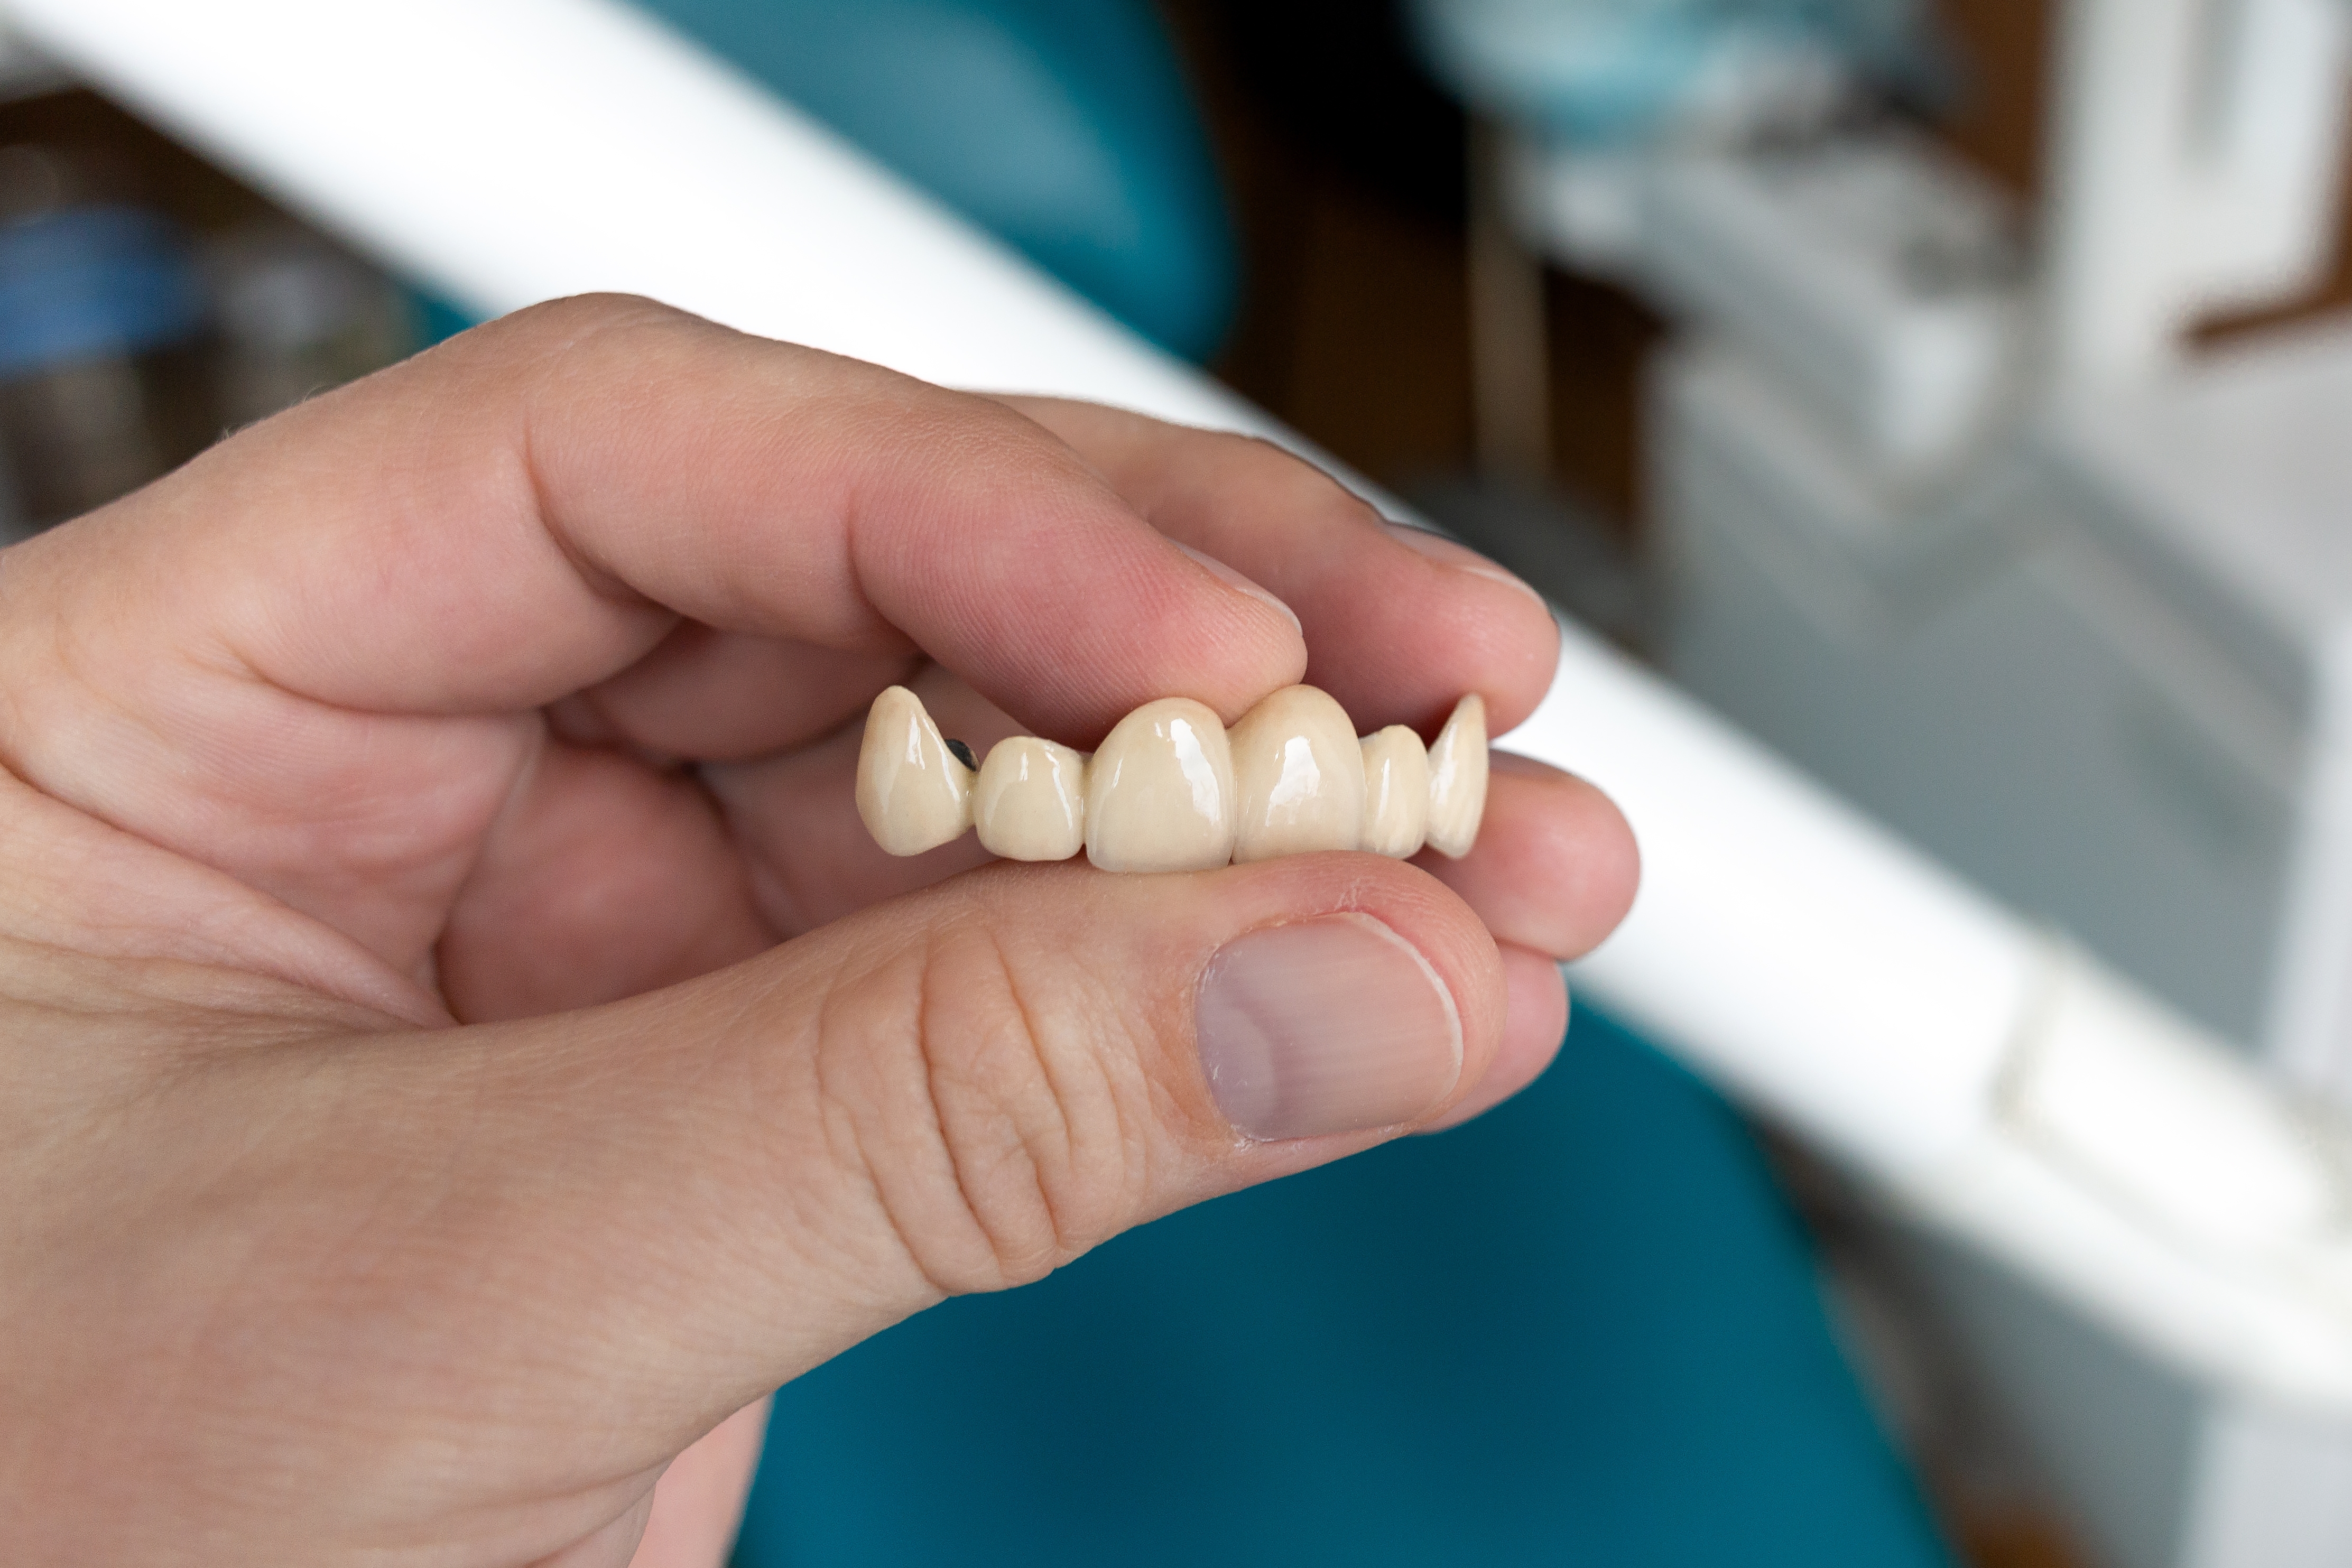 Difference between dental implants and dentures